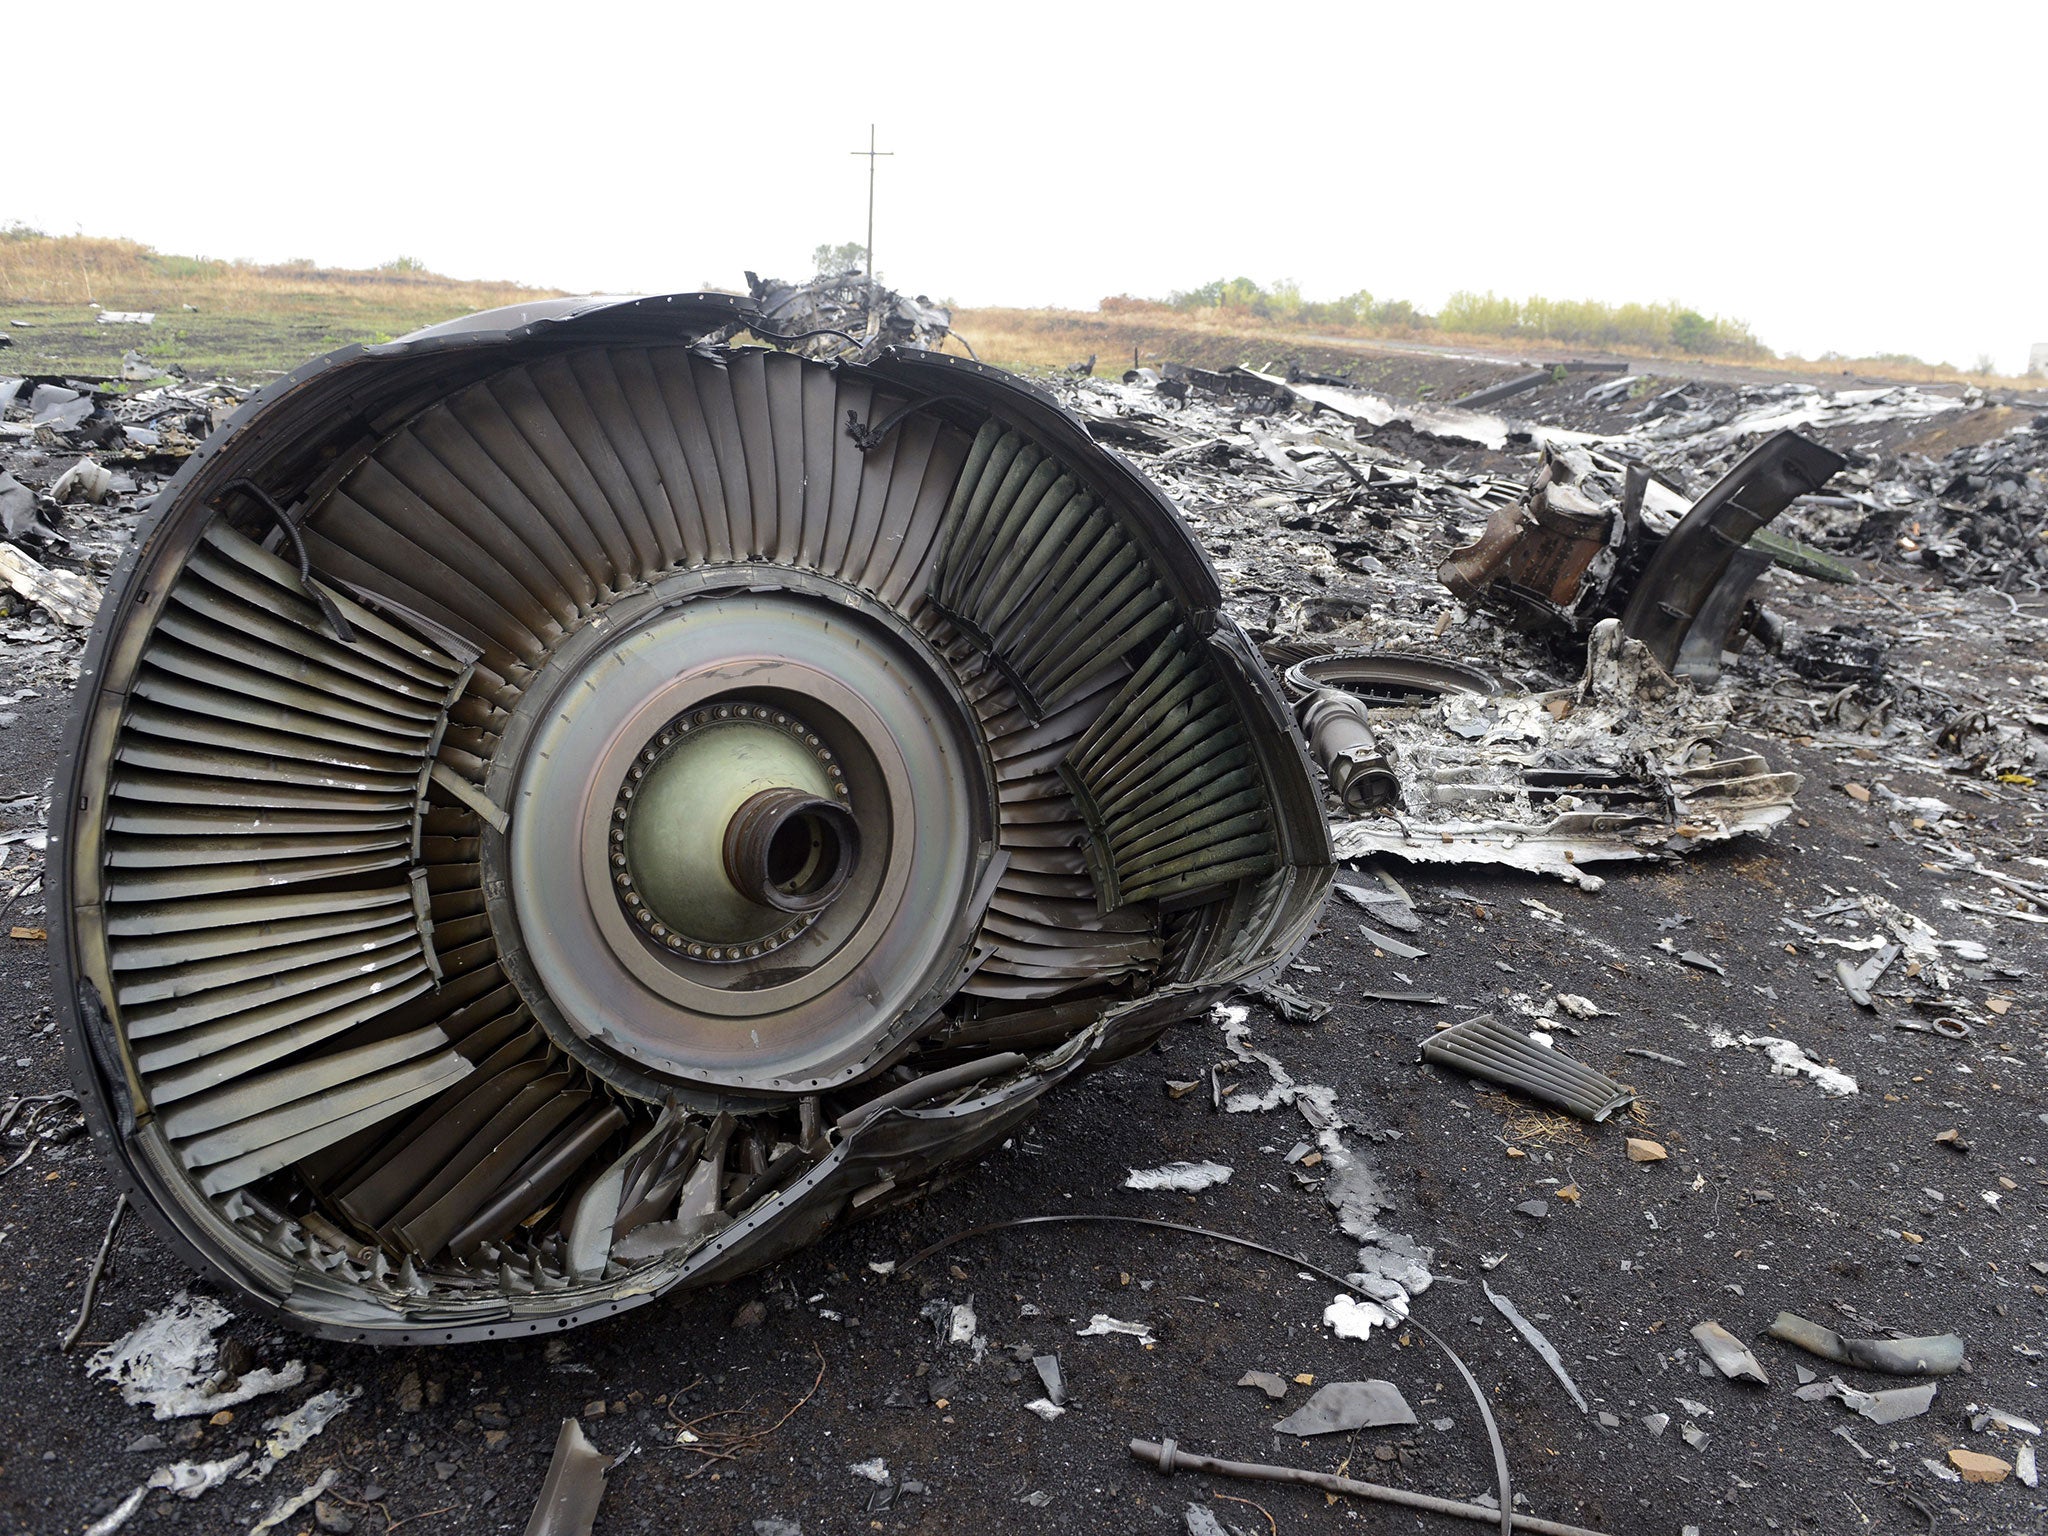 The last two years have seen the loss of several passenger jets, including Malaysia Airlines flight MH17